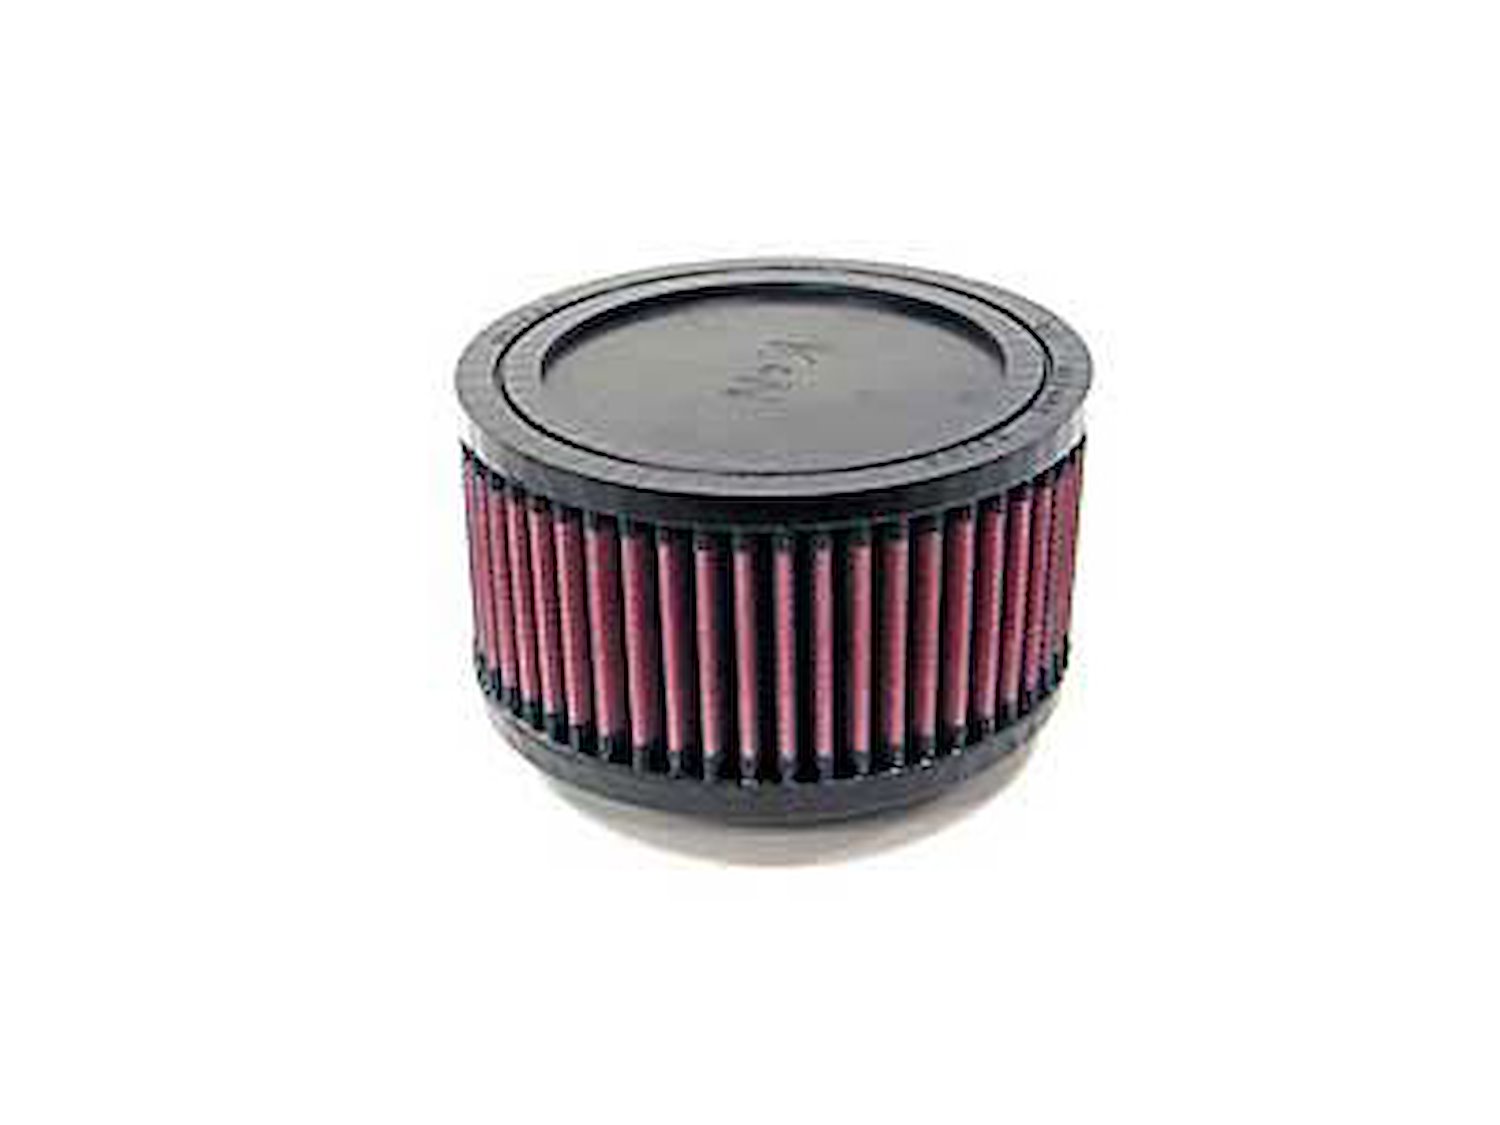 Round Straight Air Filter Flange Dia. (F): 1.813" (46 mm)